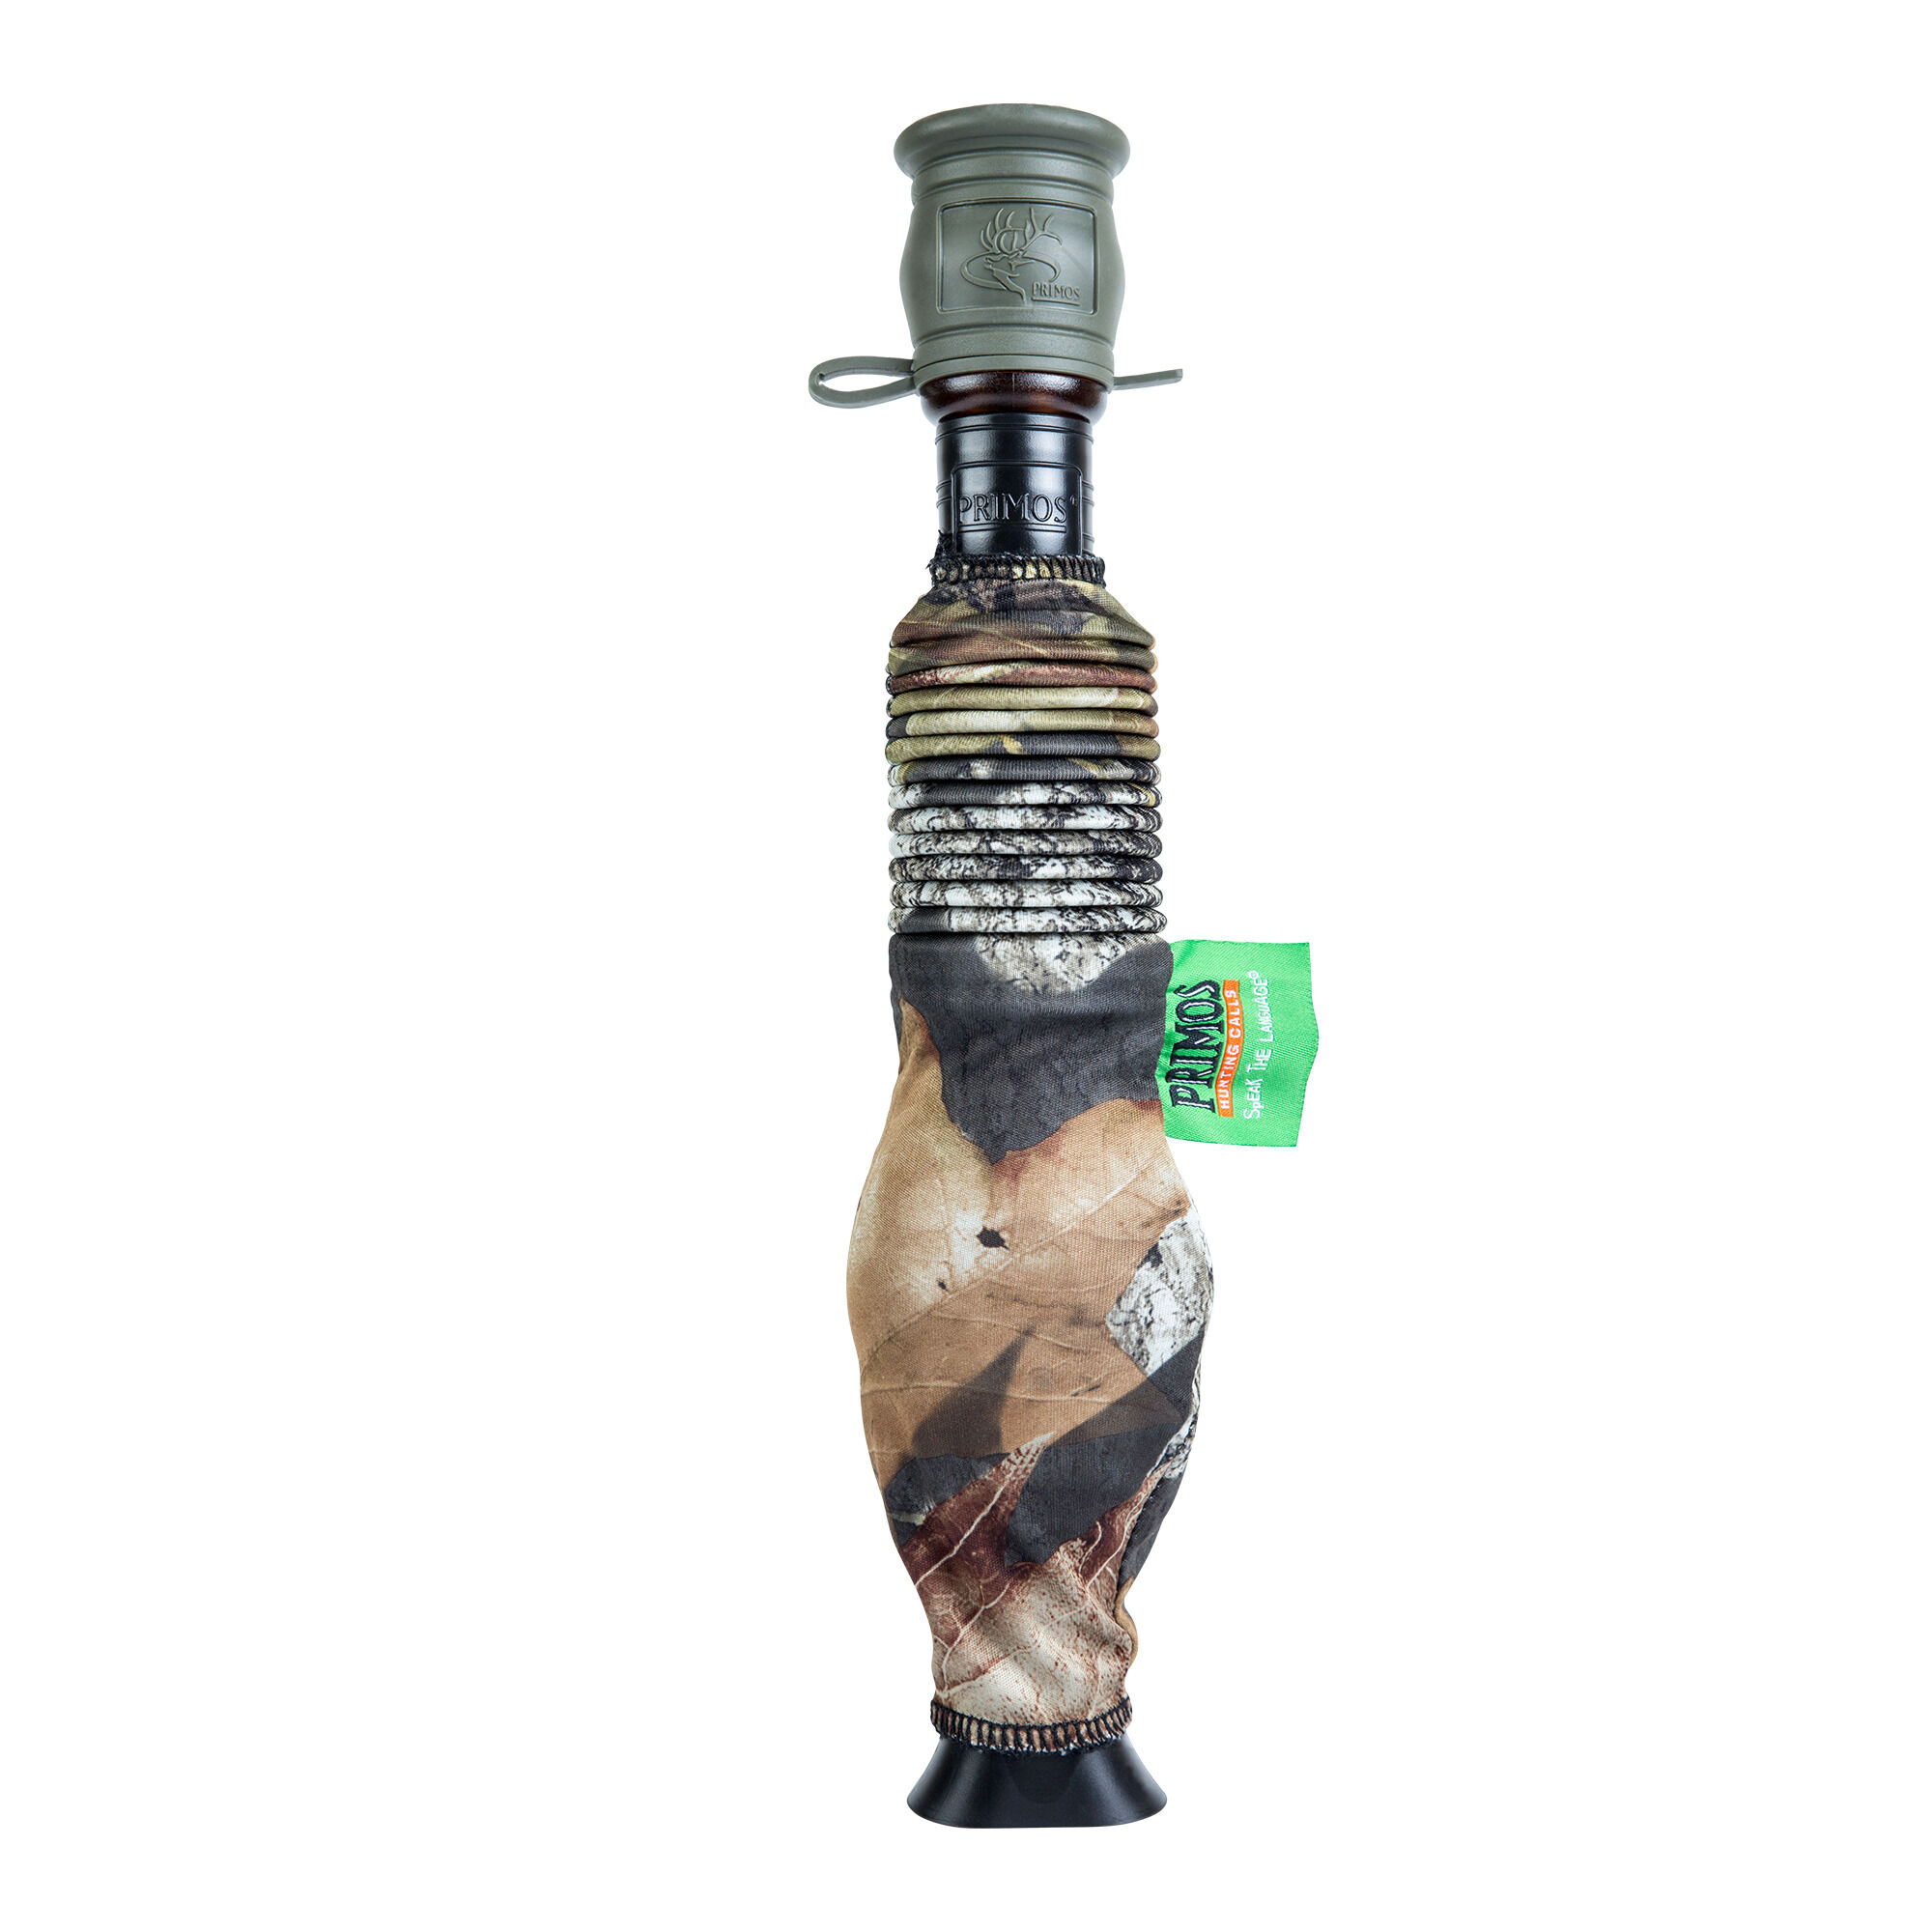 Primos Hunting 912 Elk Call Bull Horn Free2dayship Taxfree for sale online 